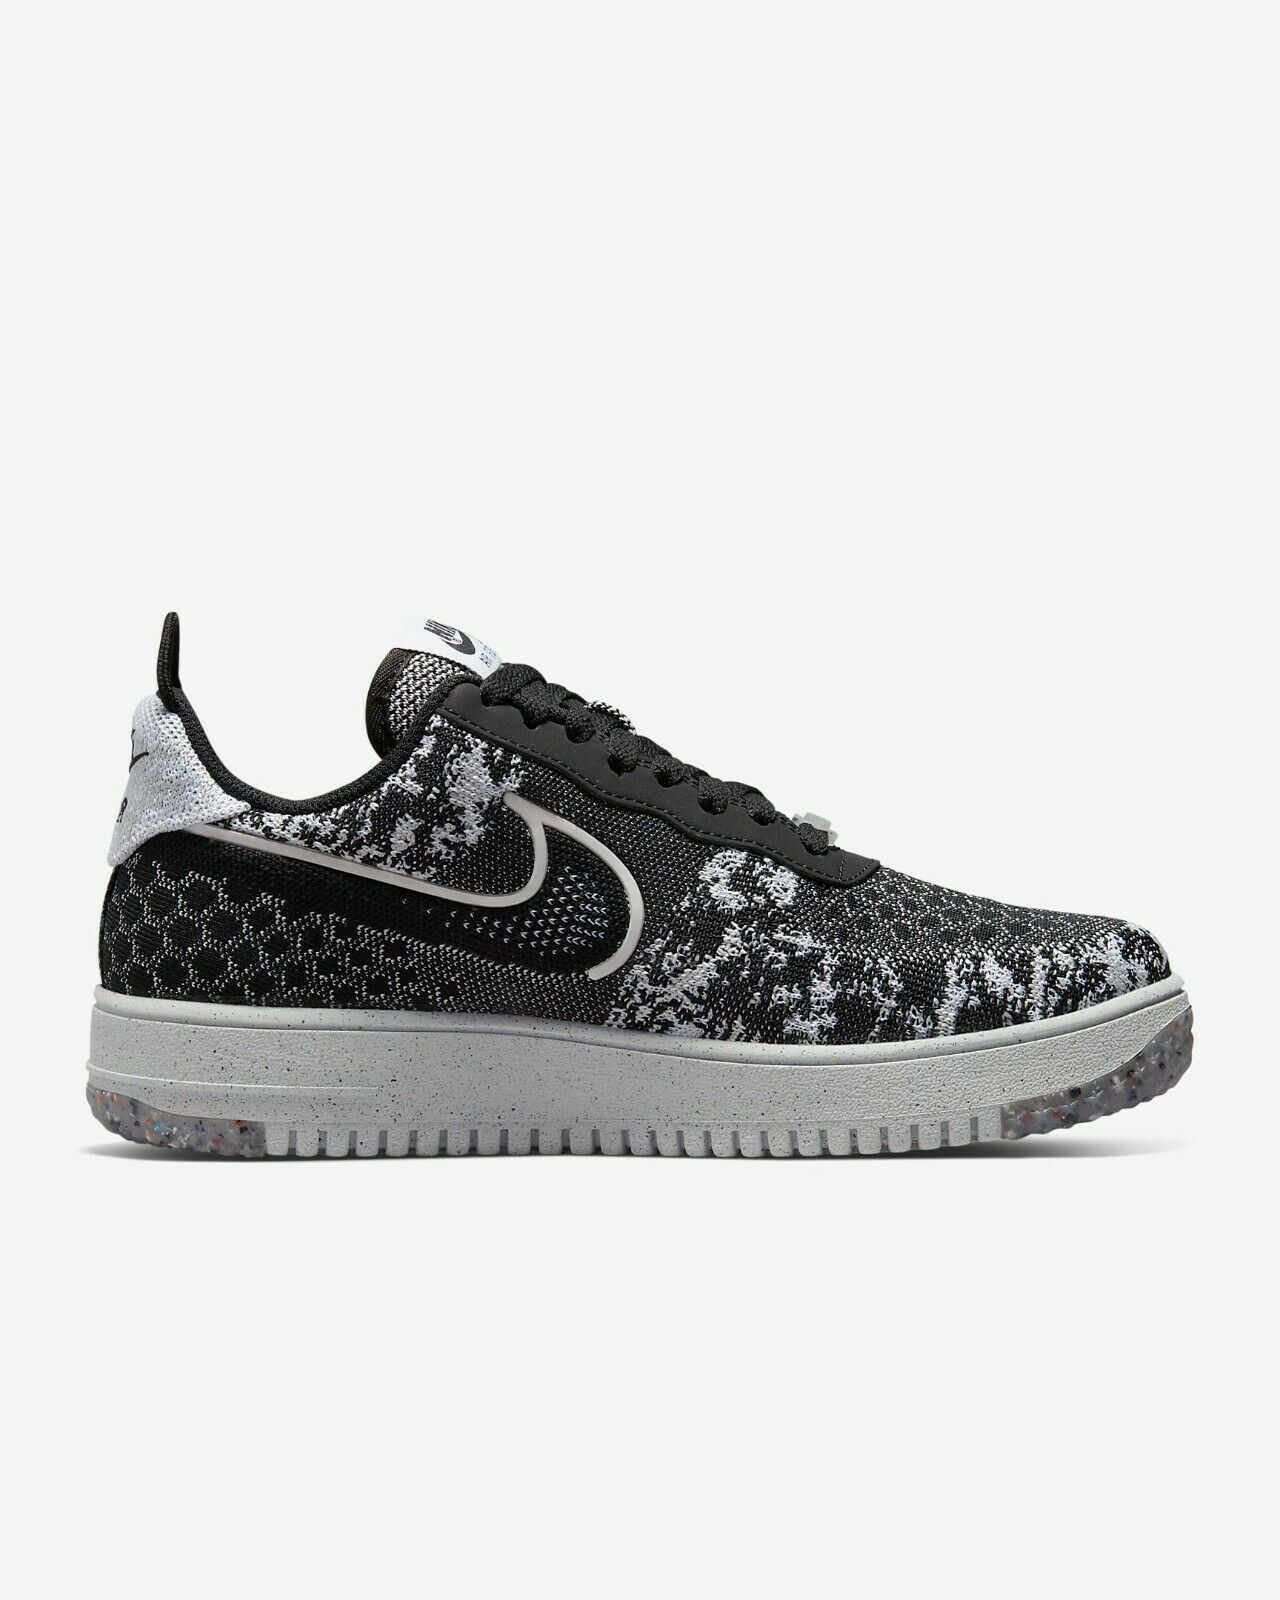 Nike Air Force 1 Crater Flyknit Next Nature Trainers in Black and White